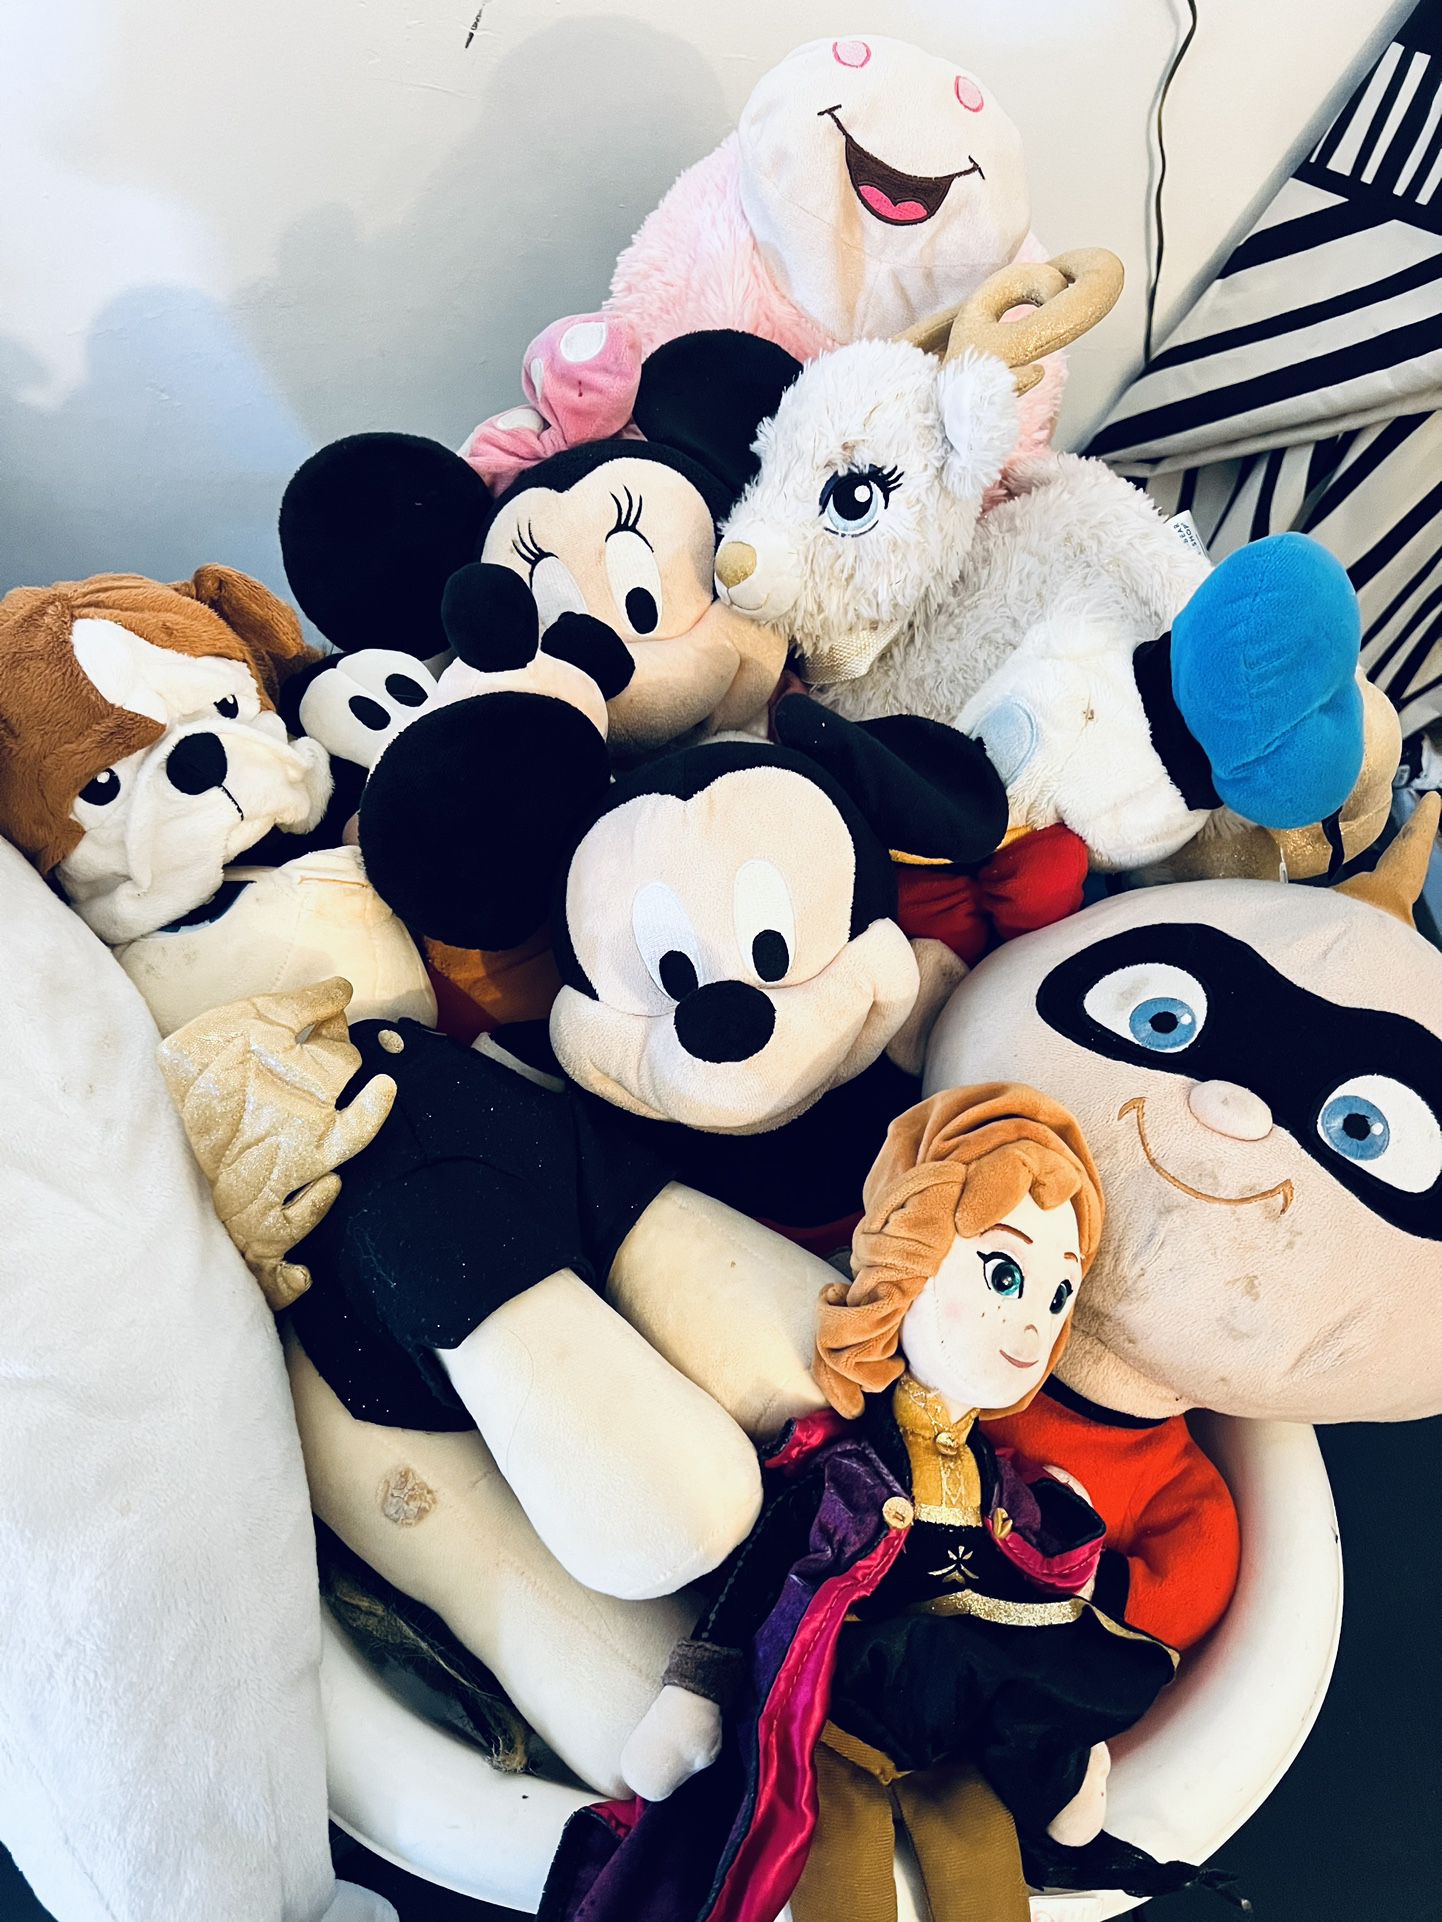 Plush For Sale / Stuffed Animals 🧸 Peluches 